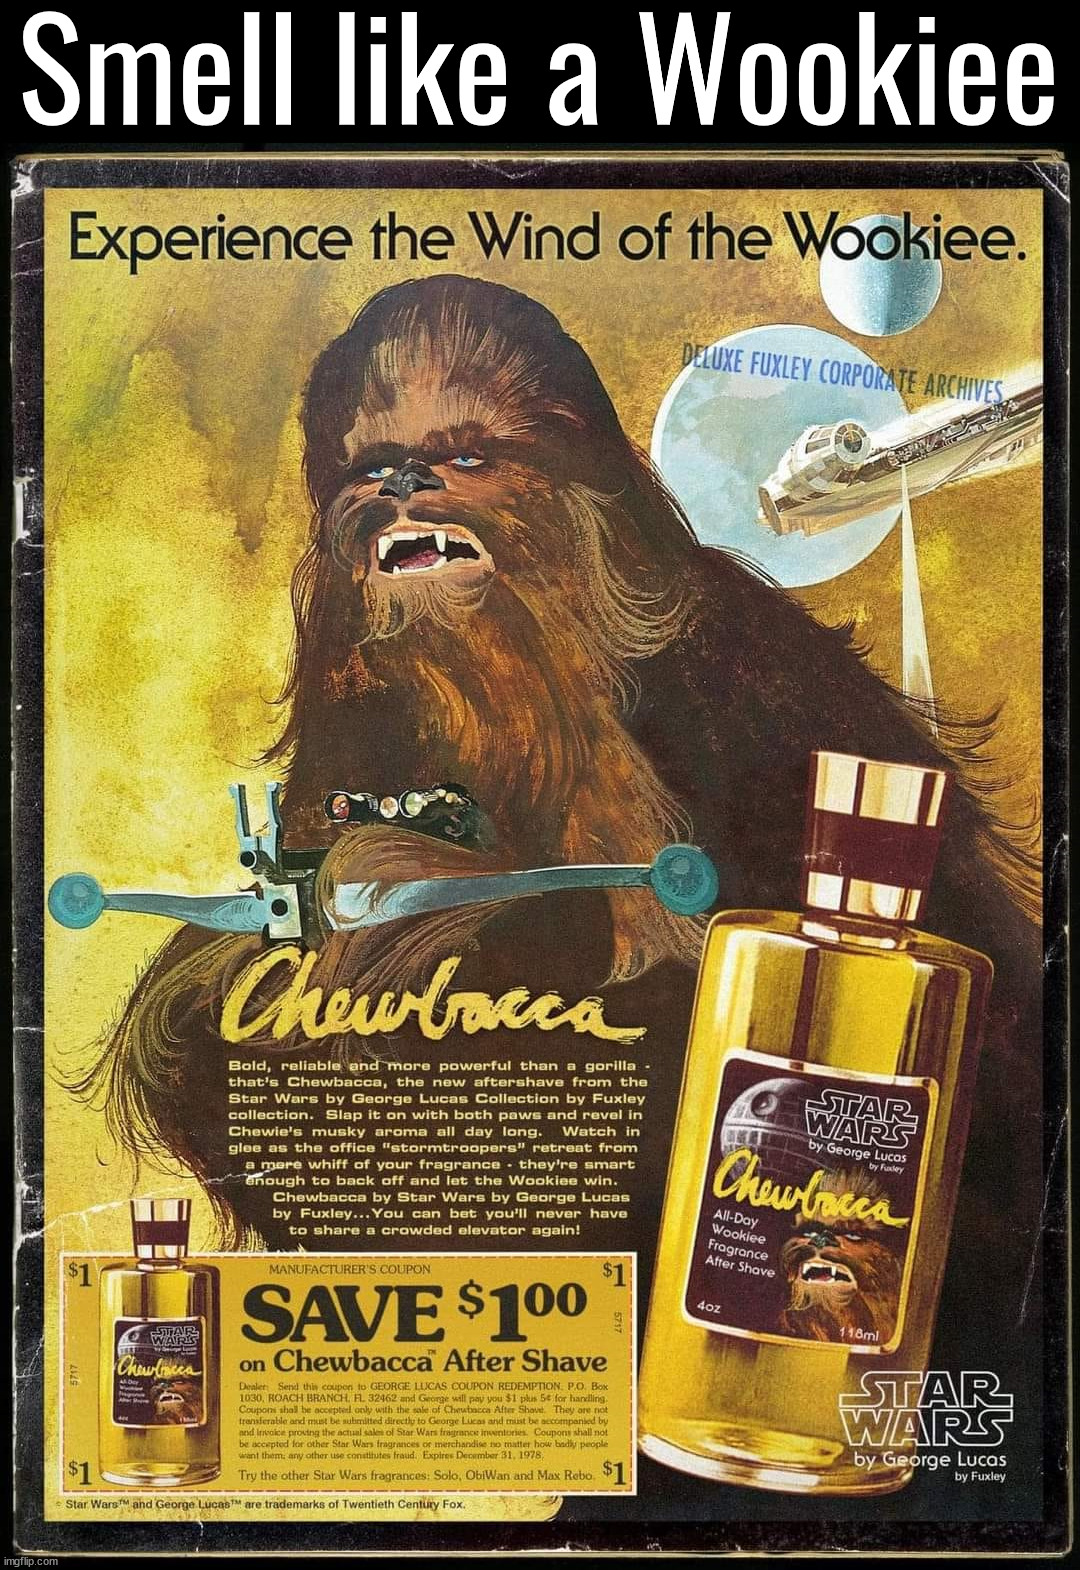 Smell like a Wookiee | made w/ Imgflip meme maker